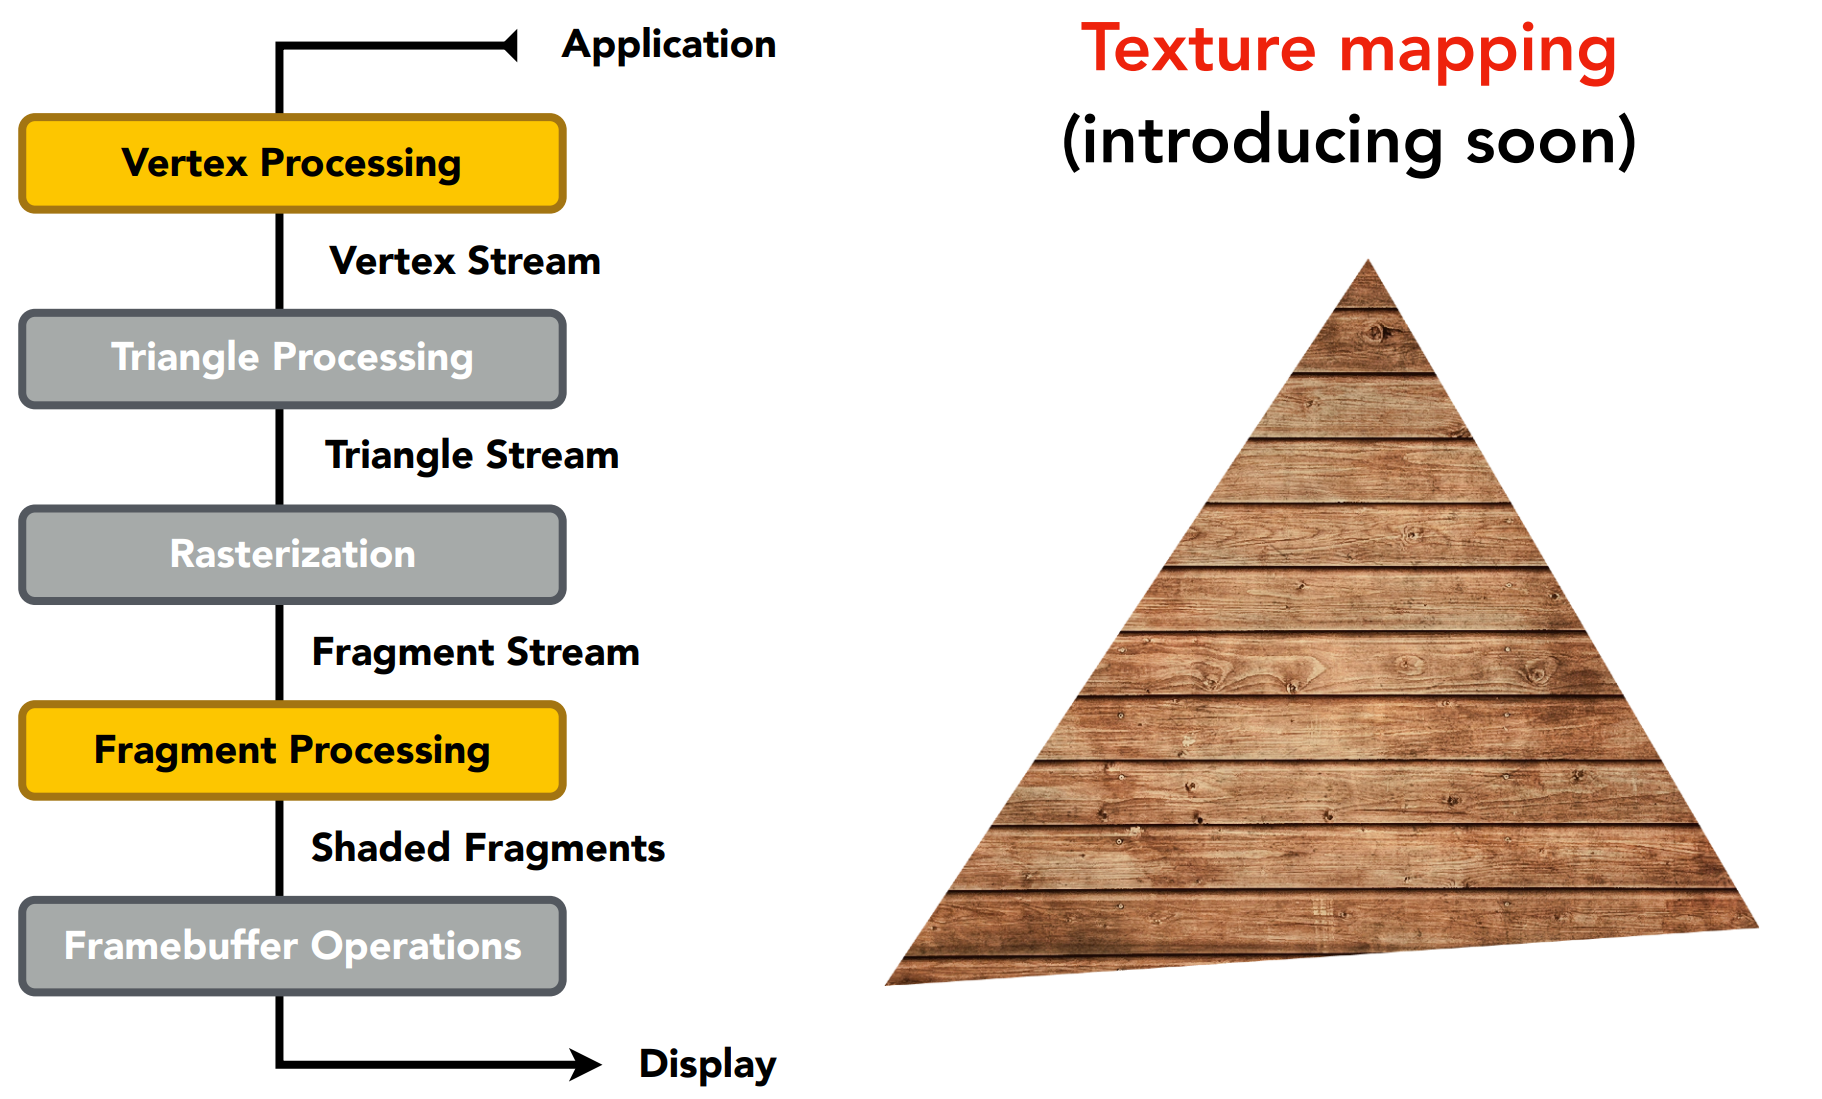 TexMapping